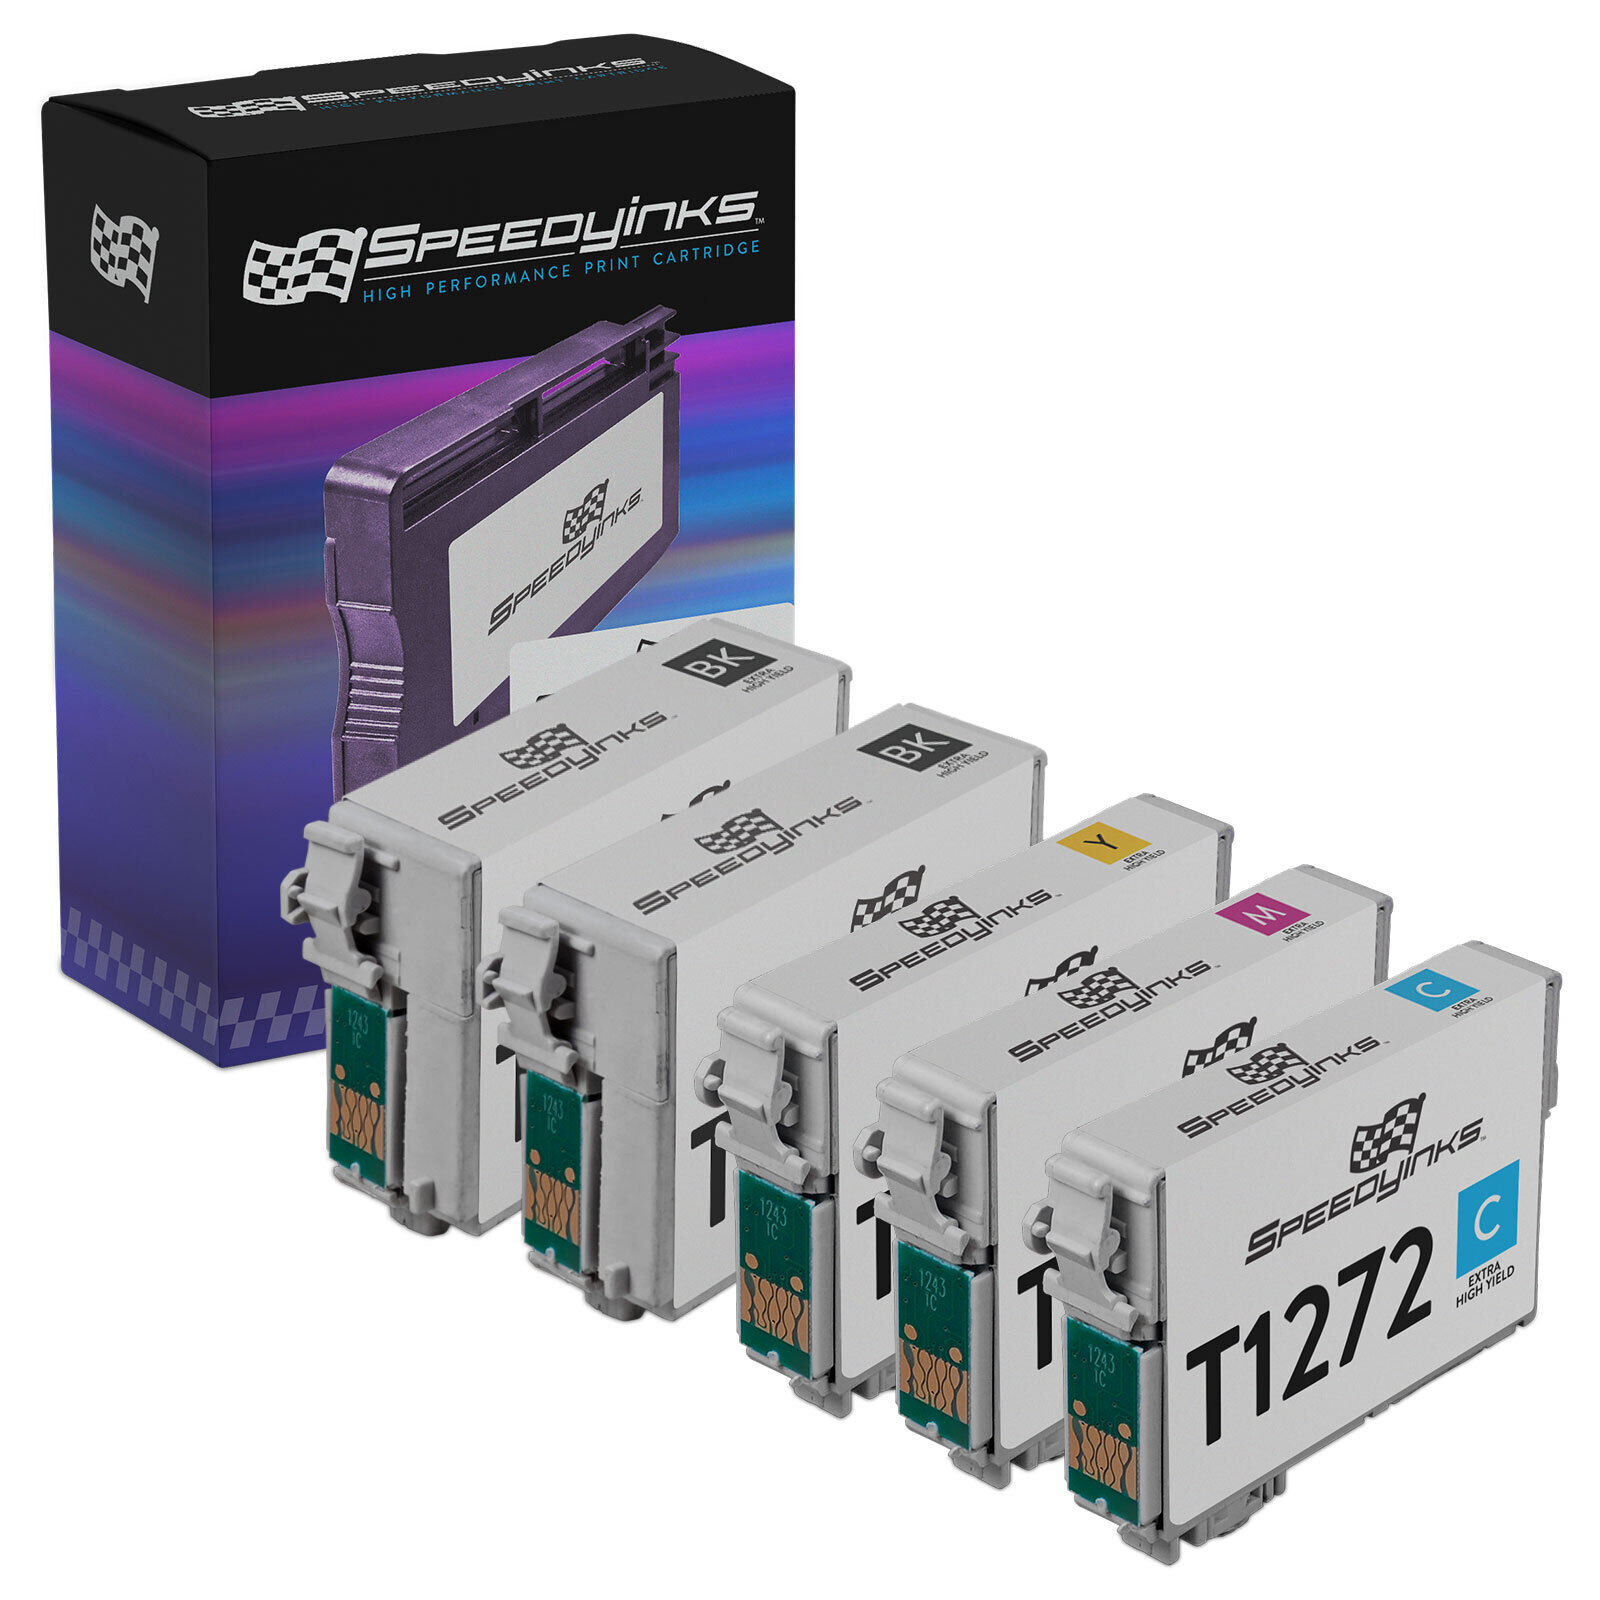 Reman Ink Cartridge set of 5 for Epson T127120 T127220 T127320 T127420 T127